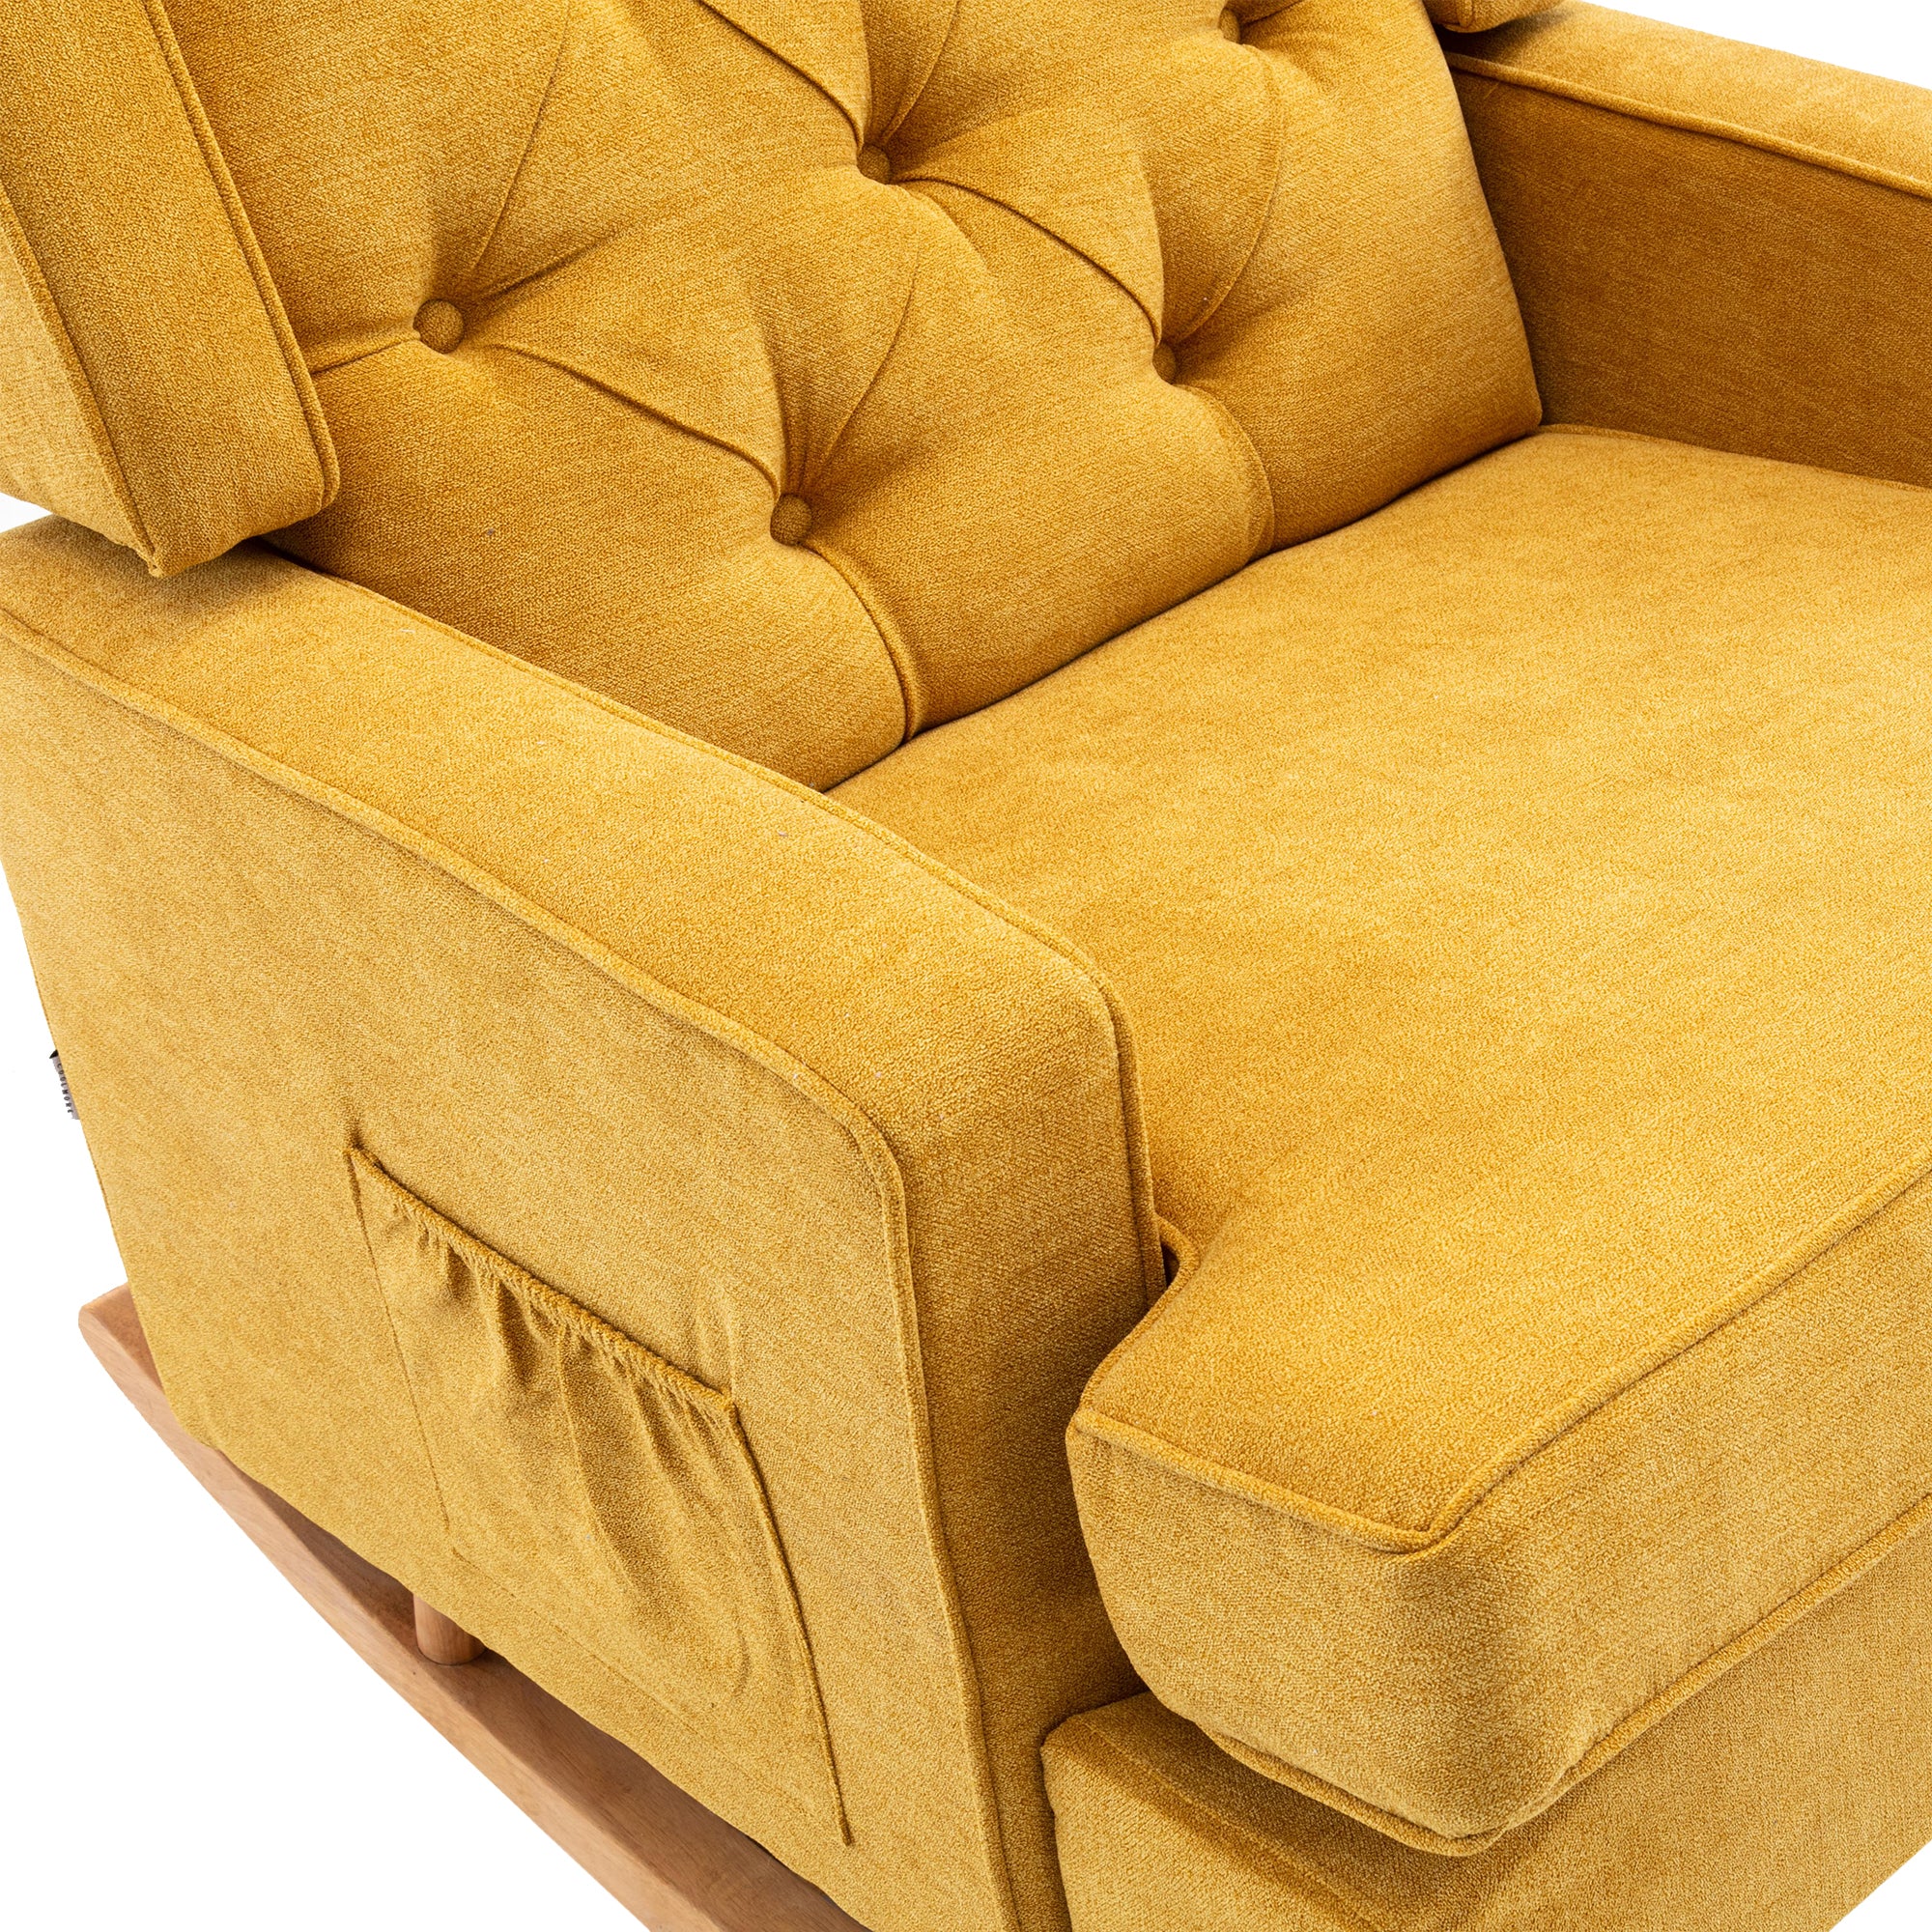 COOLMORE living room Comfortable rocking chair accent mustard-polyester